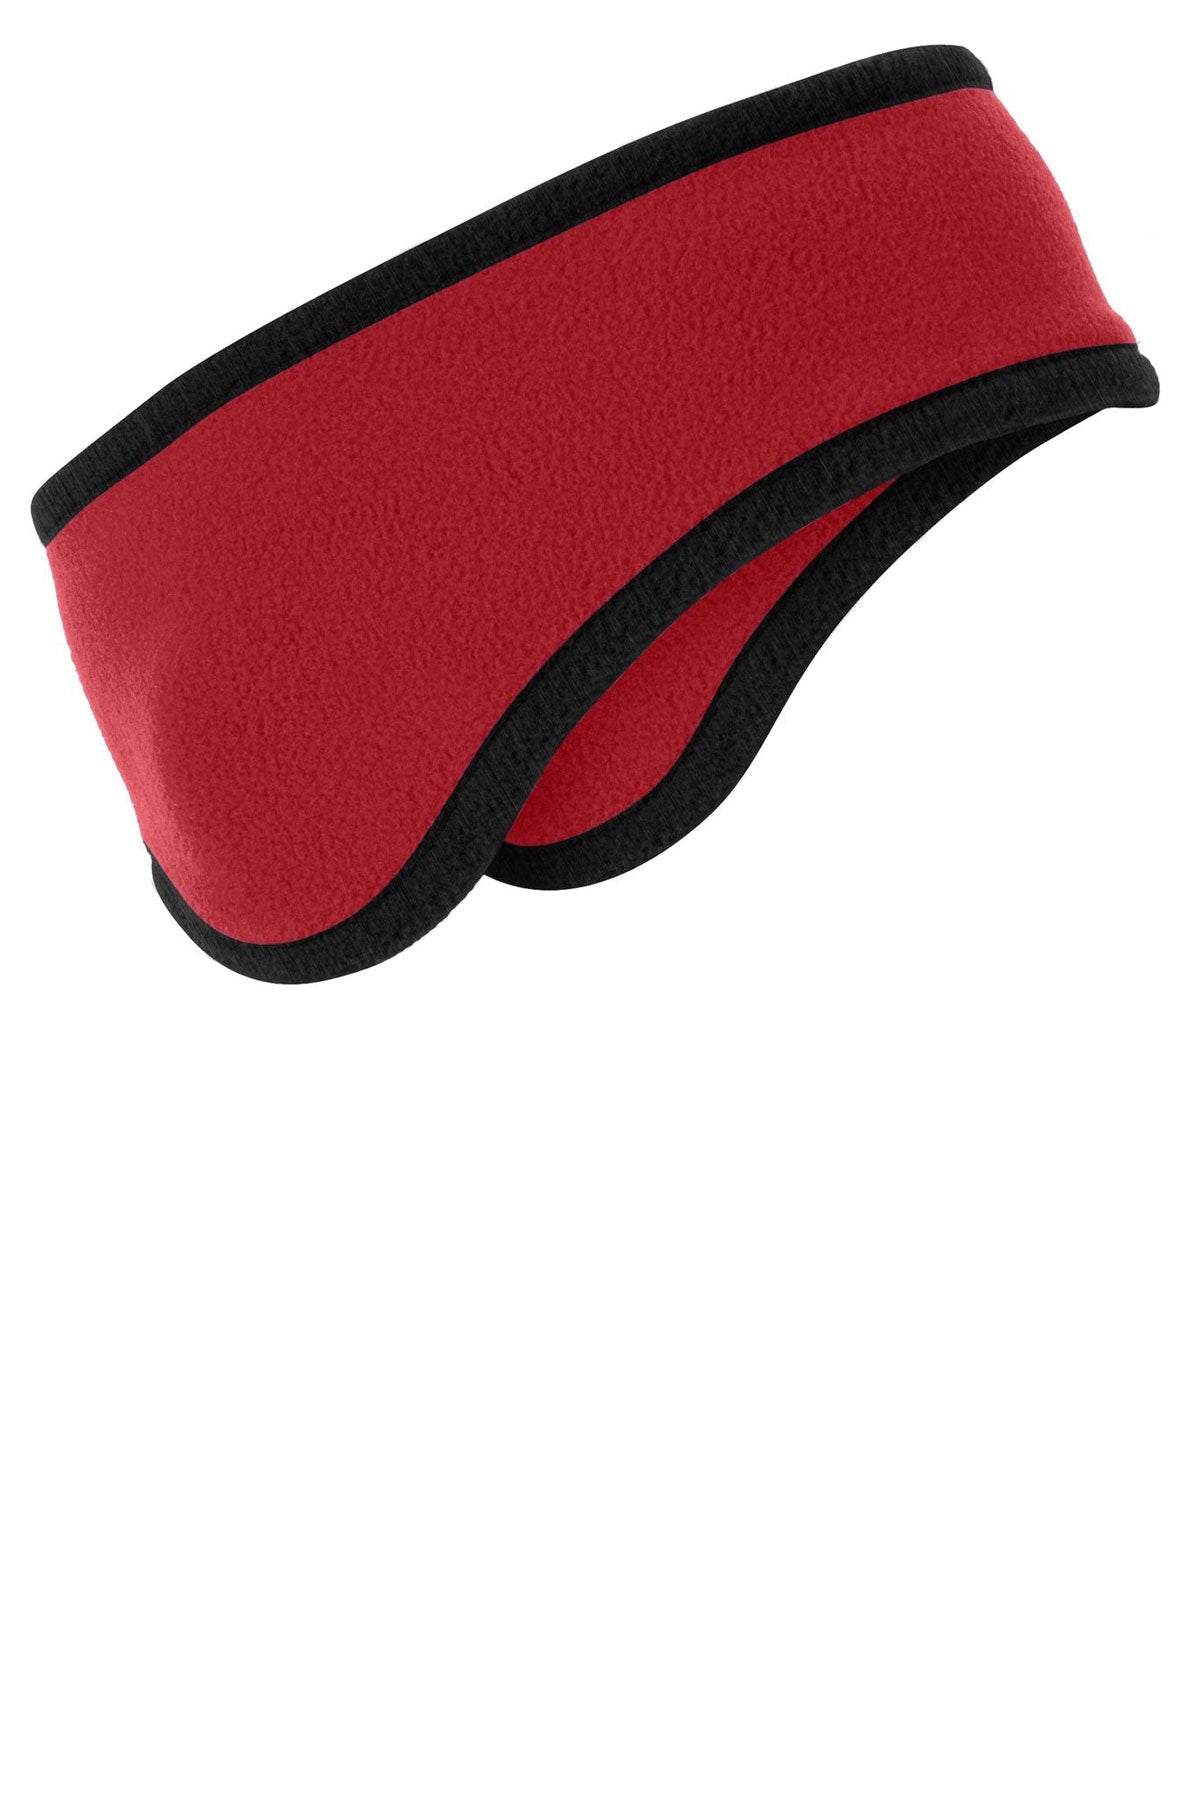 Port Authority Two-Color Fleece Customized Headbands, Red